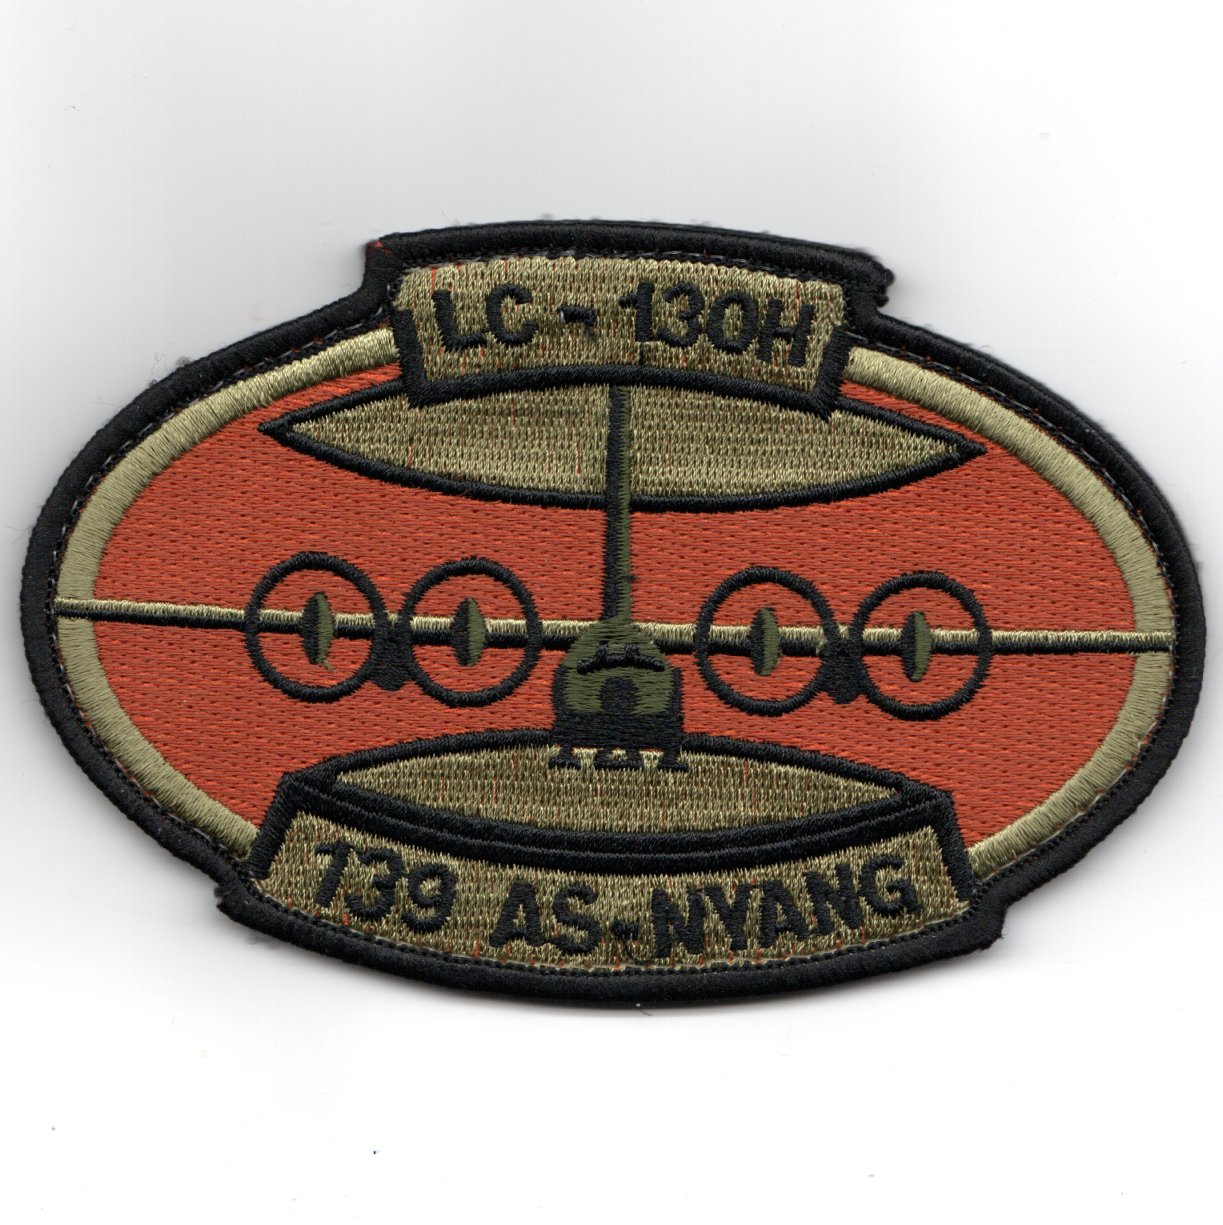 139th ALS/NYANG - Oval Patch (OCP)